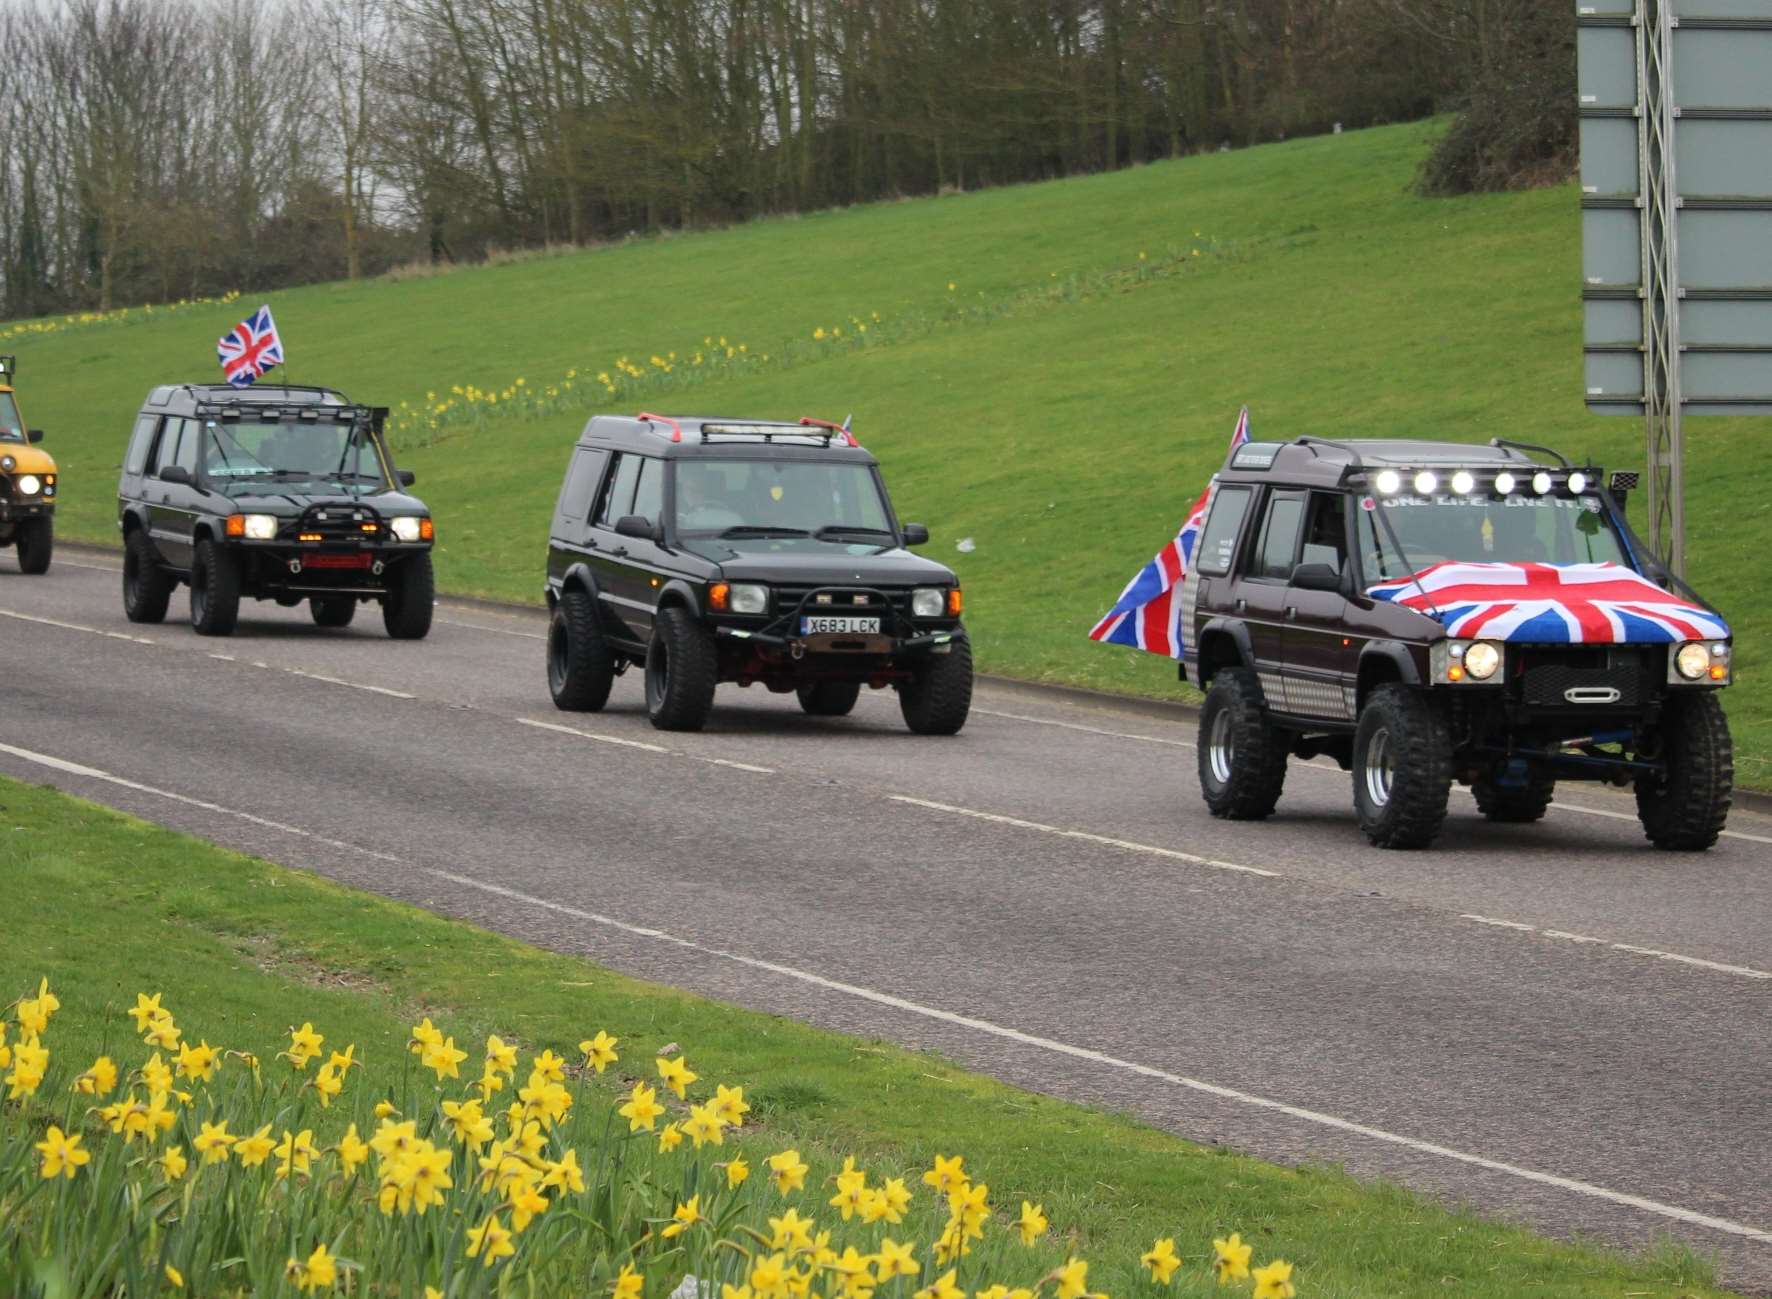 More Land Rovers in BarryChessell's final farewell